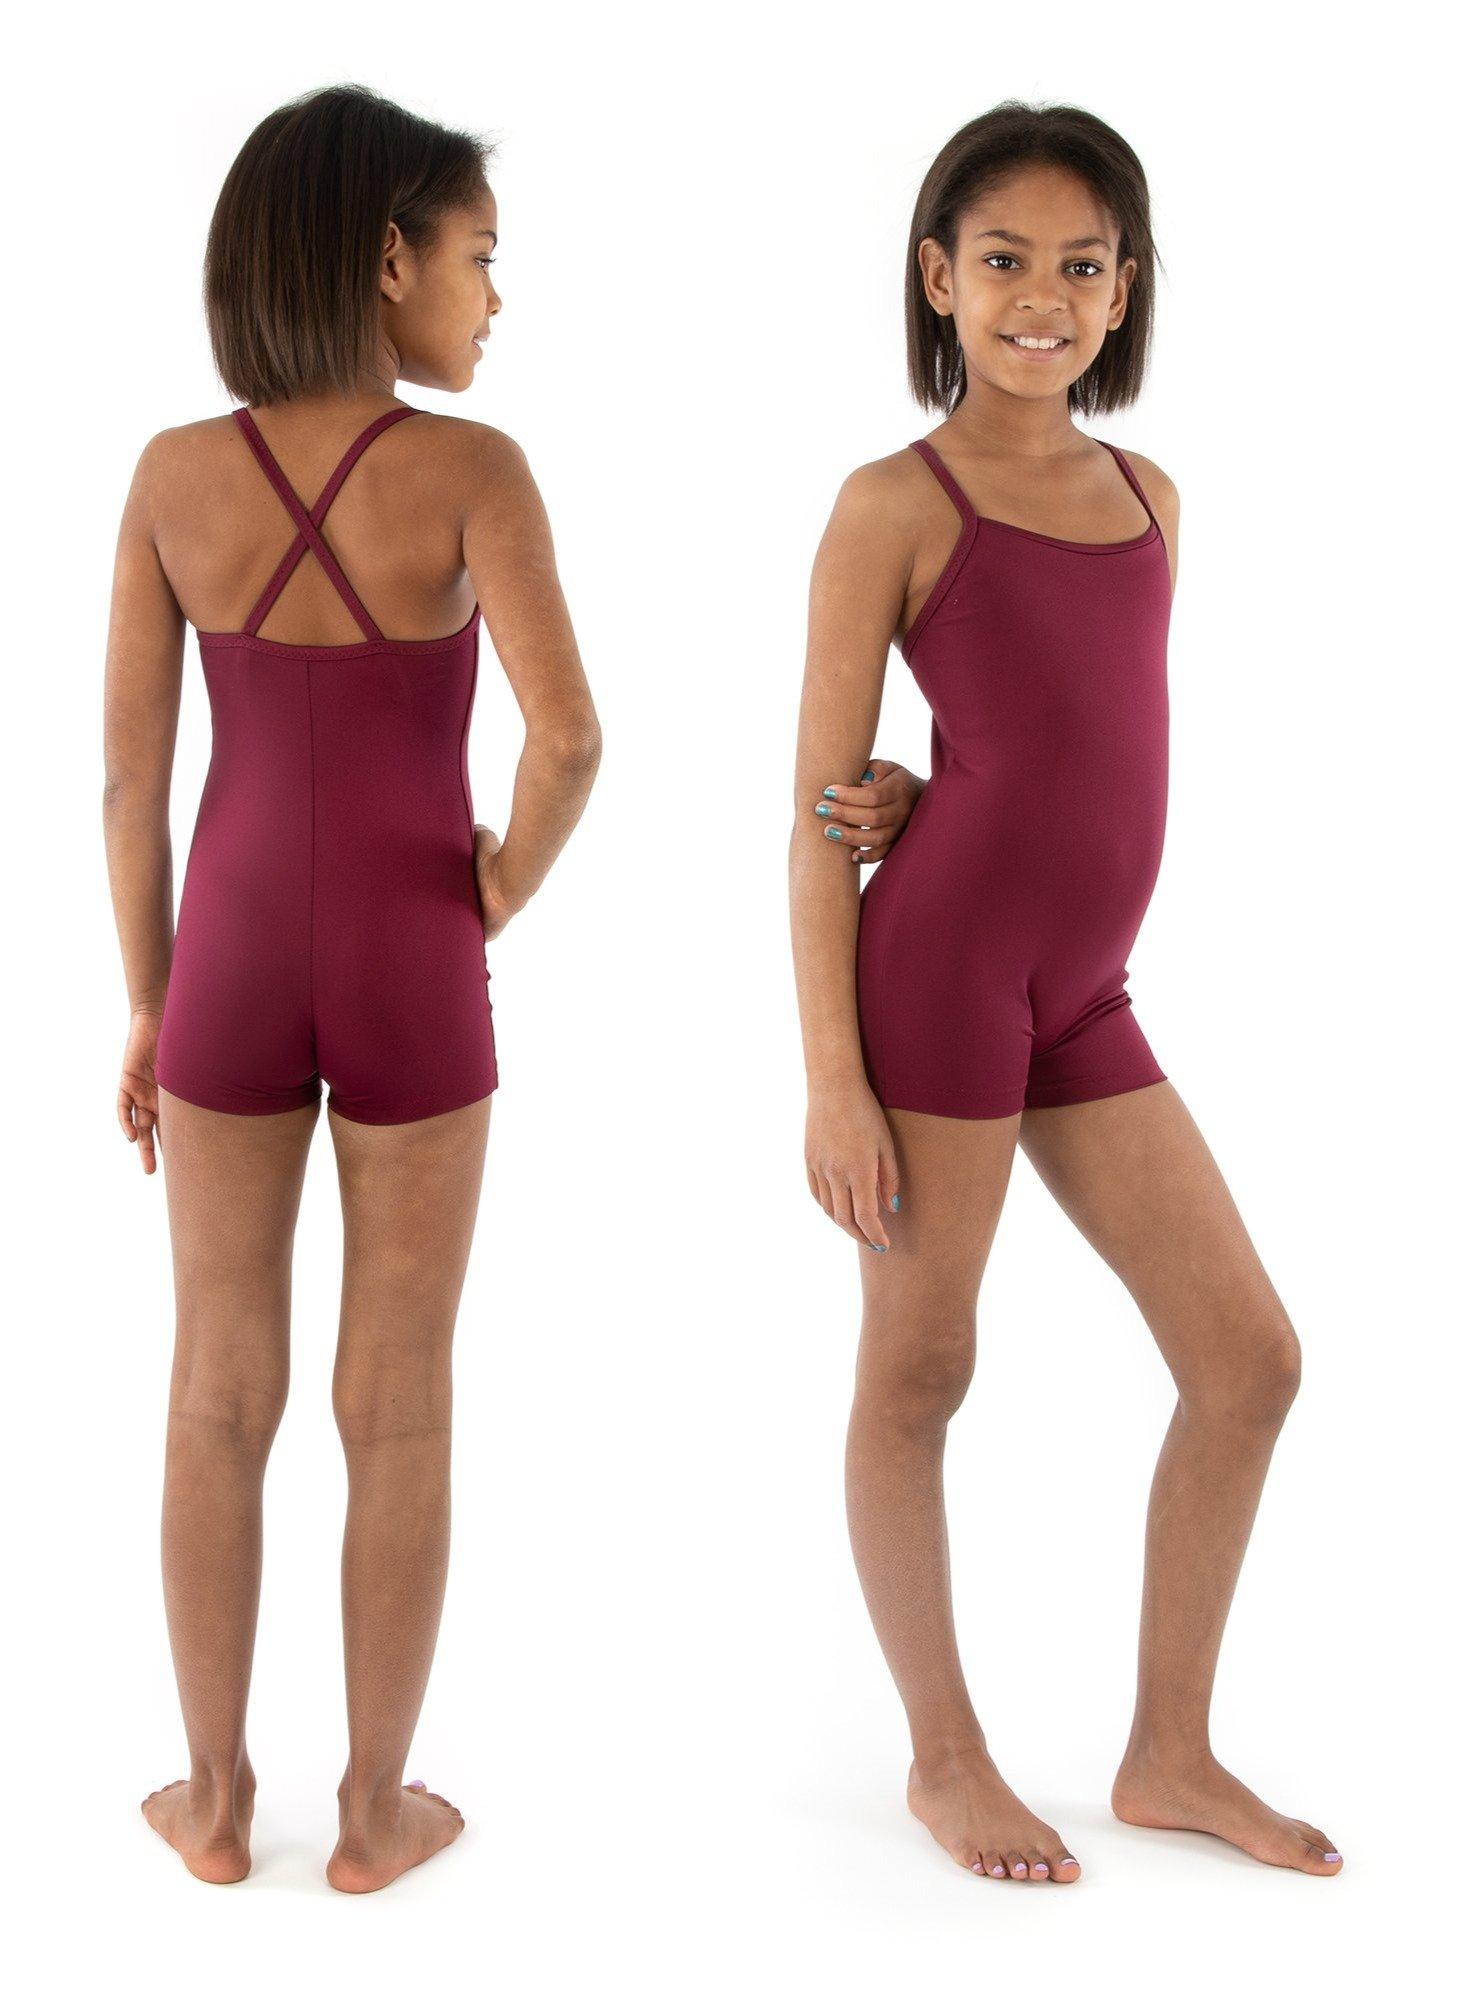 Pattern hack: Add a snap crotch to your favorite leotard – Jalie